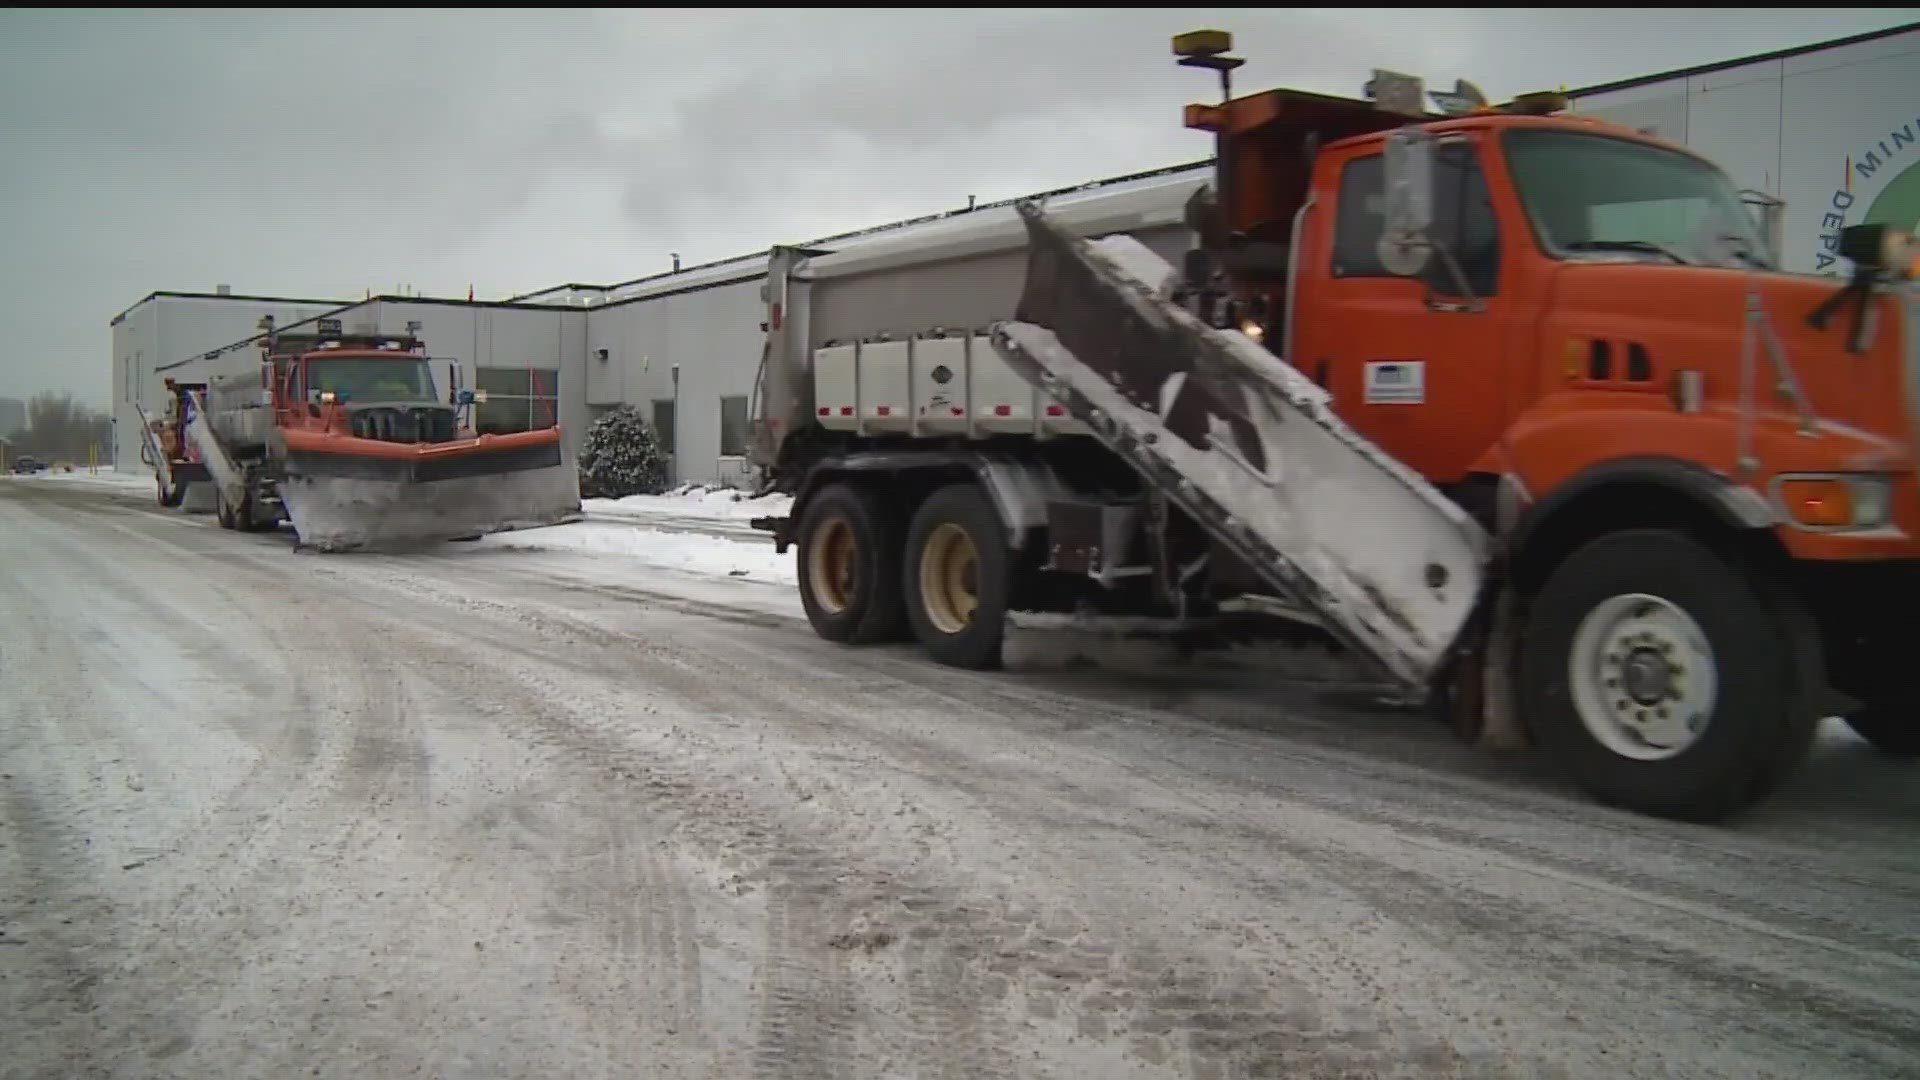 Pollution experts say MnDOT and Minnesota public works departments are being more cautious about road salt use and its environmental impact.